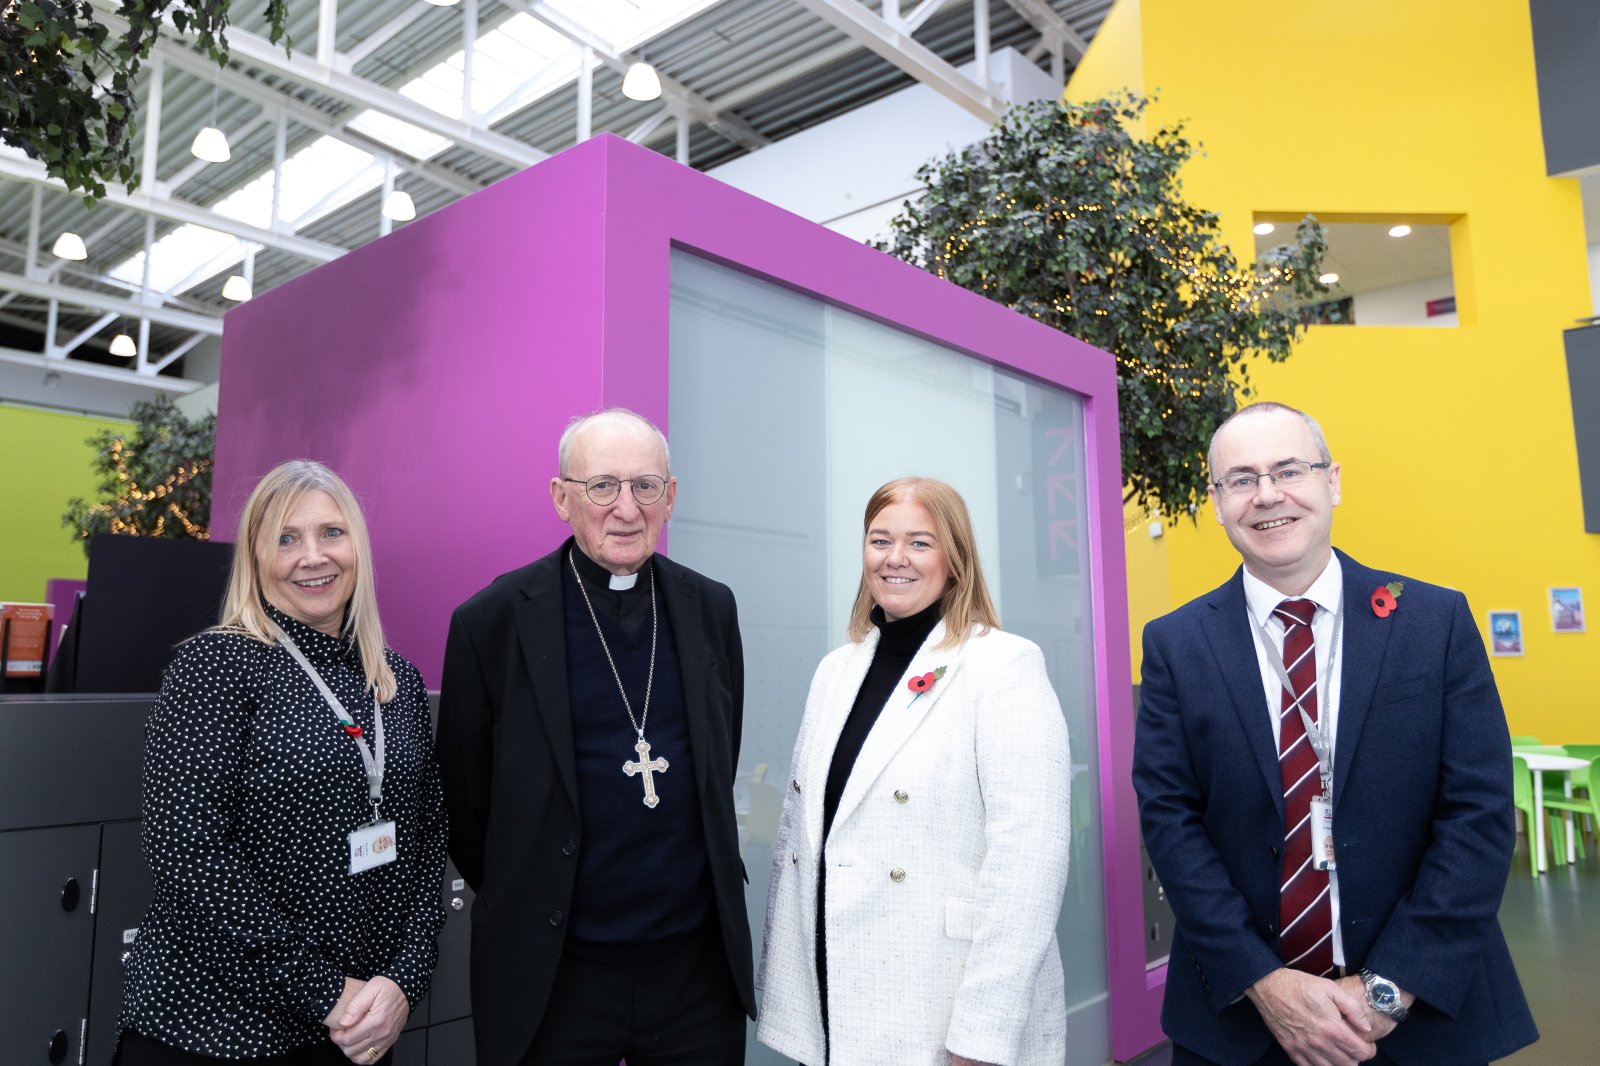 Bishop Tom Williams blesses school support centre for students with mental health needs